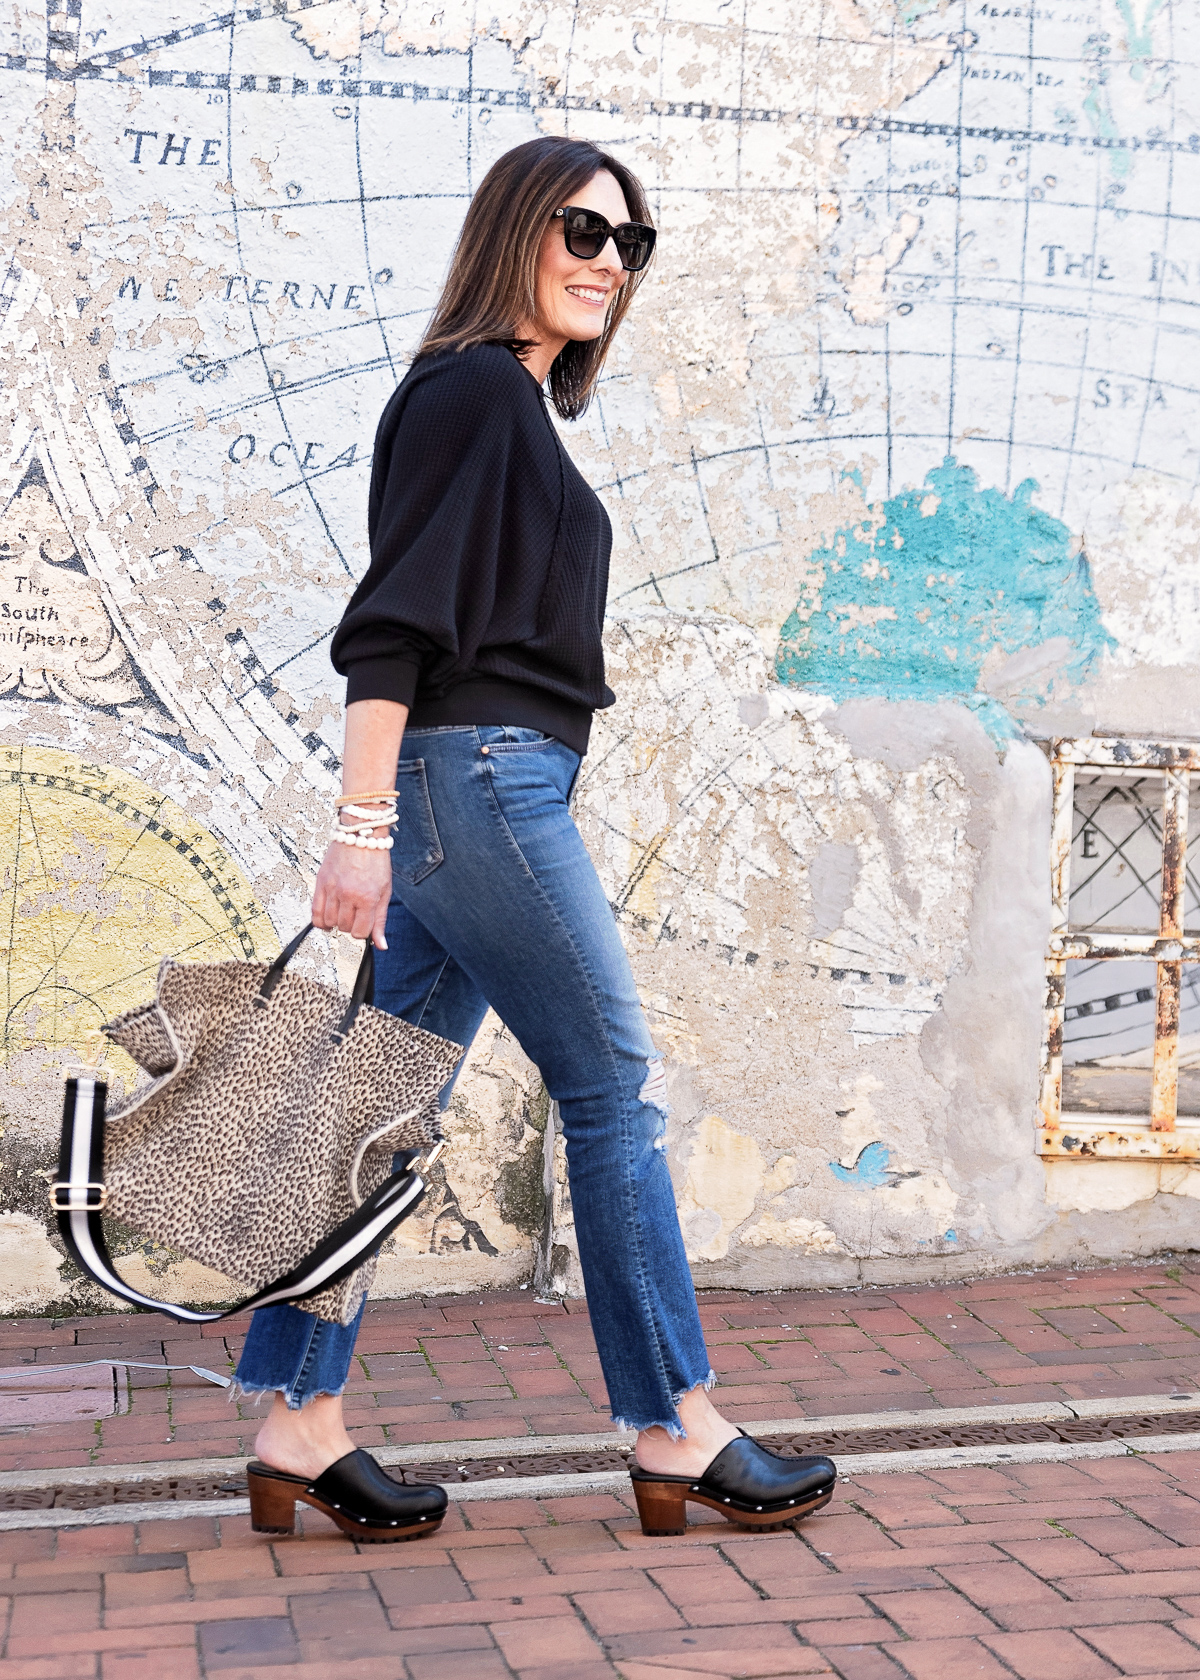 The 5 Best Shoes To Wear With Flare Jeans (And 1 That's a Serious